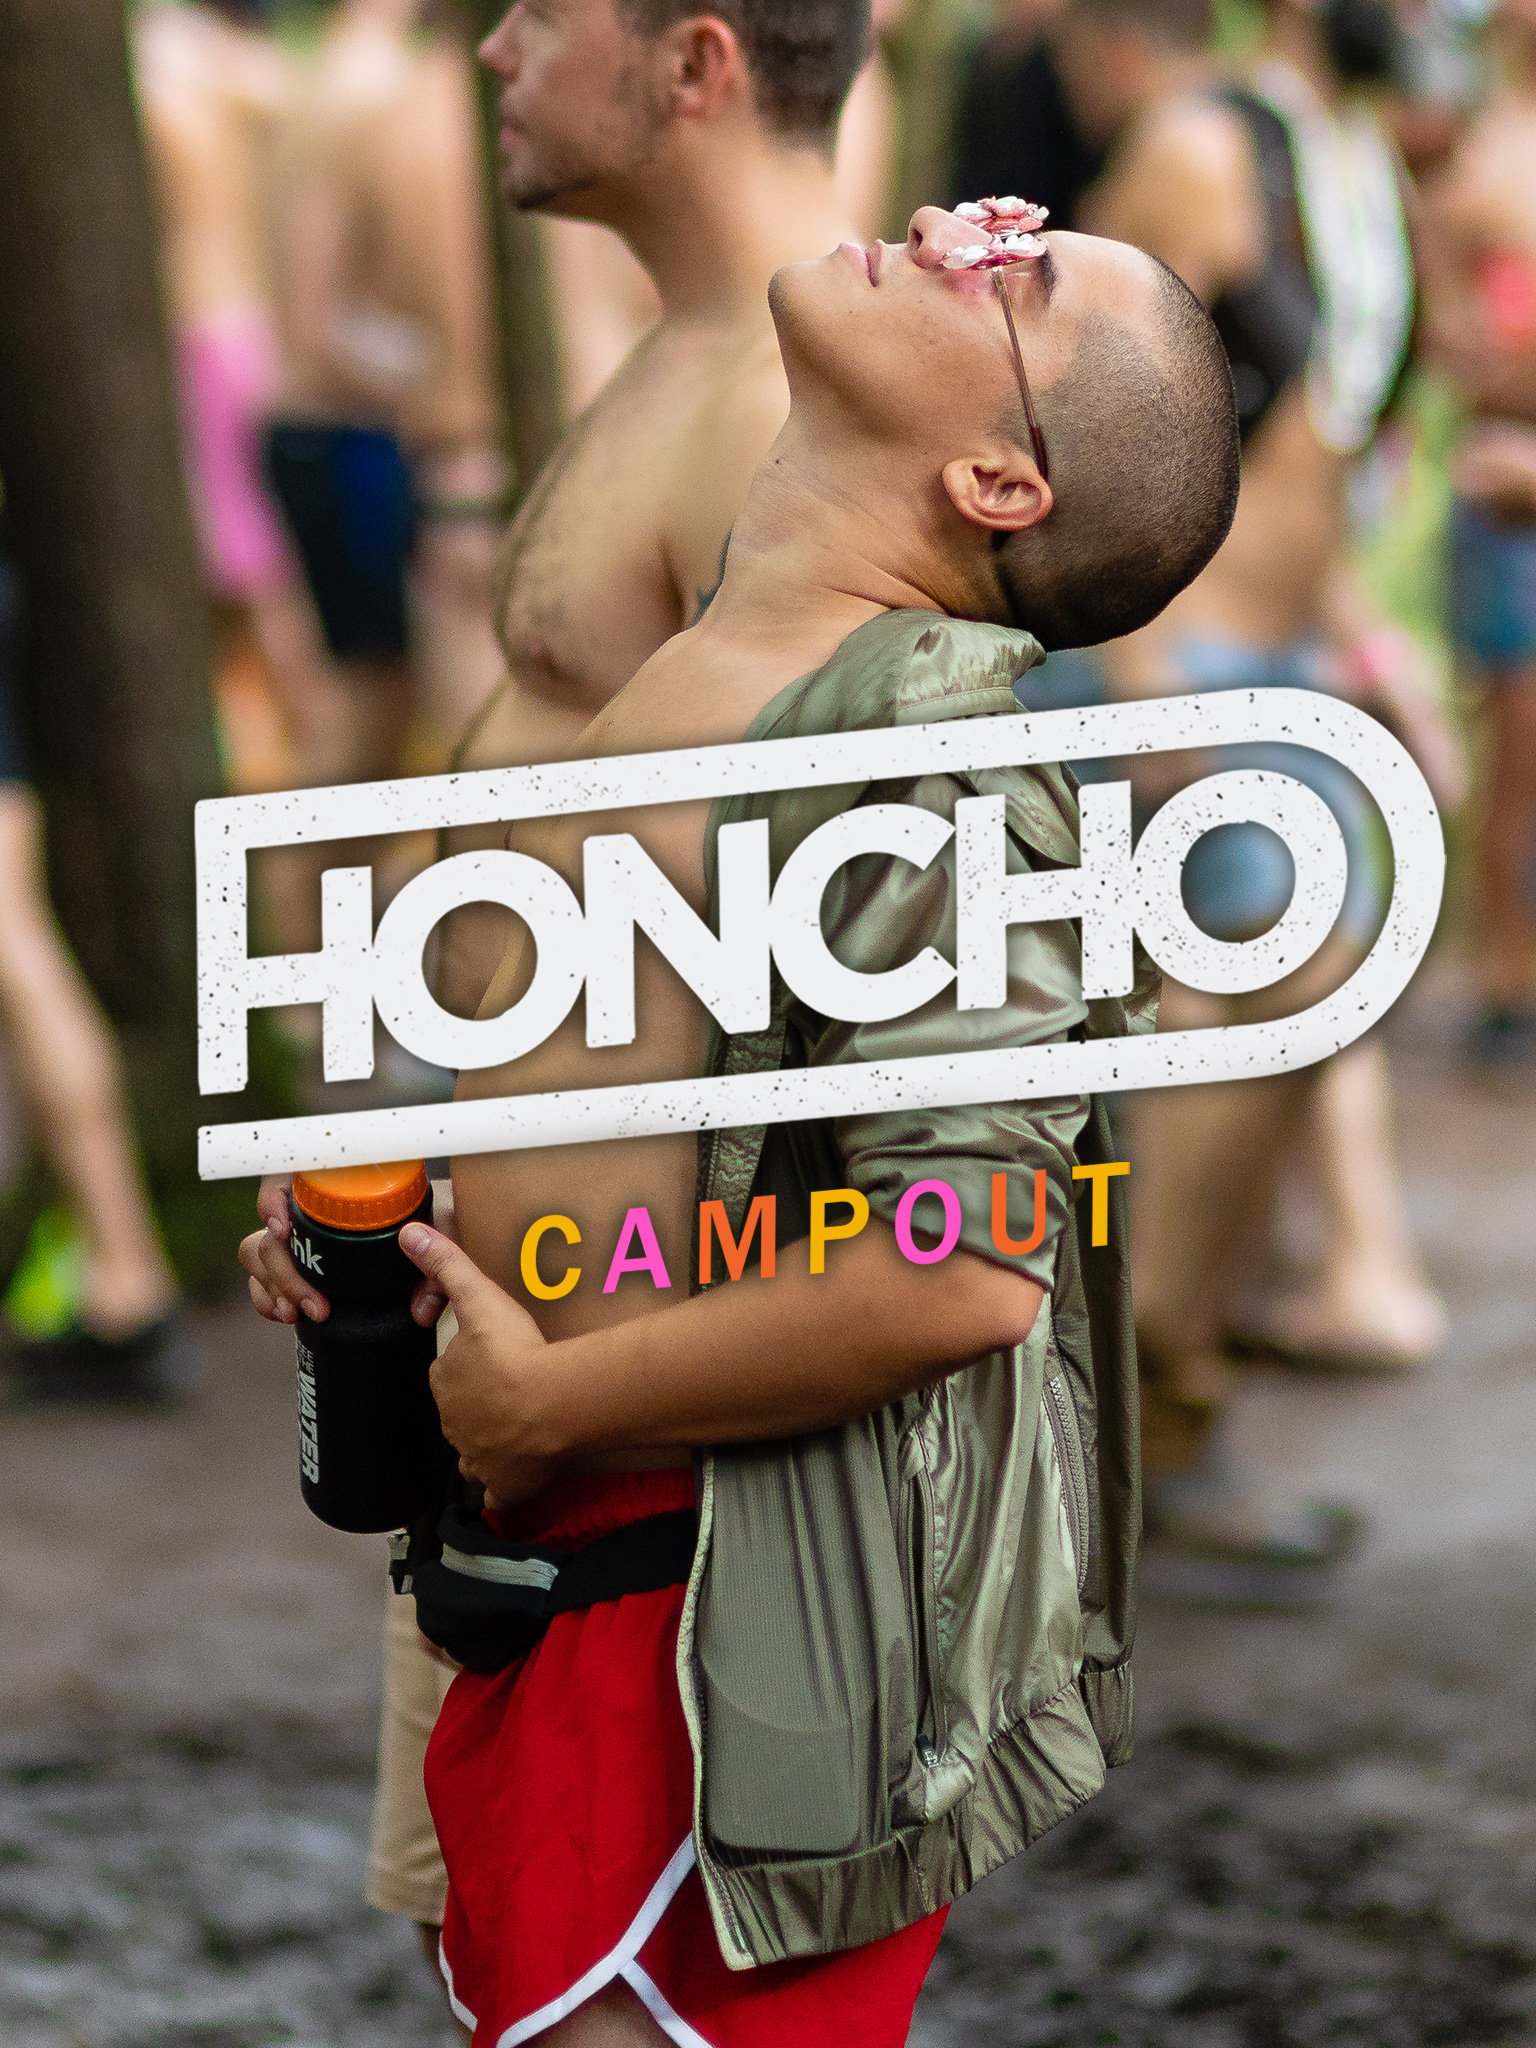 Honcho Campout: A weekend with America's queer techno underground